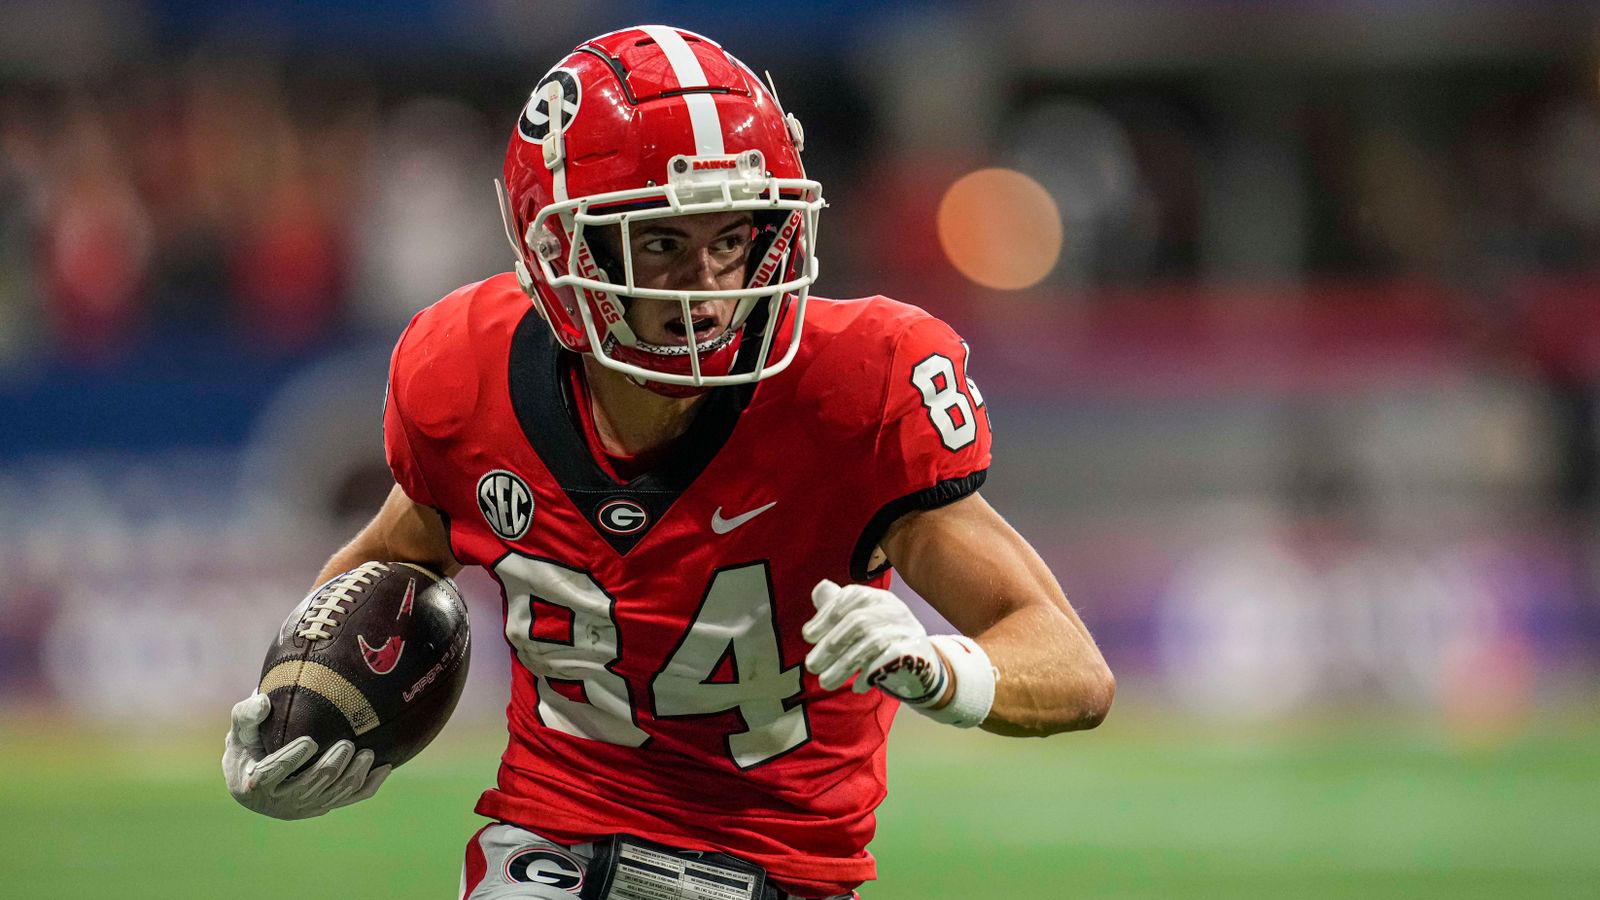 NFL News: The Los Angeles Chargers Make a Strategic Move, Trading Up to Acquire Georgia’s Ladd McConkey